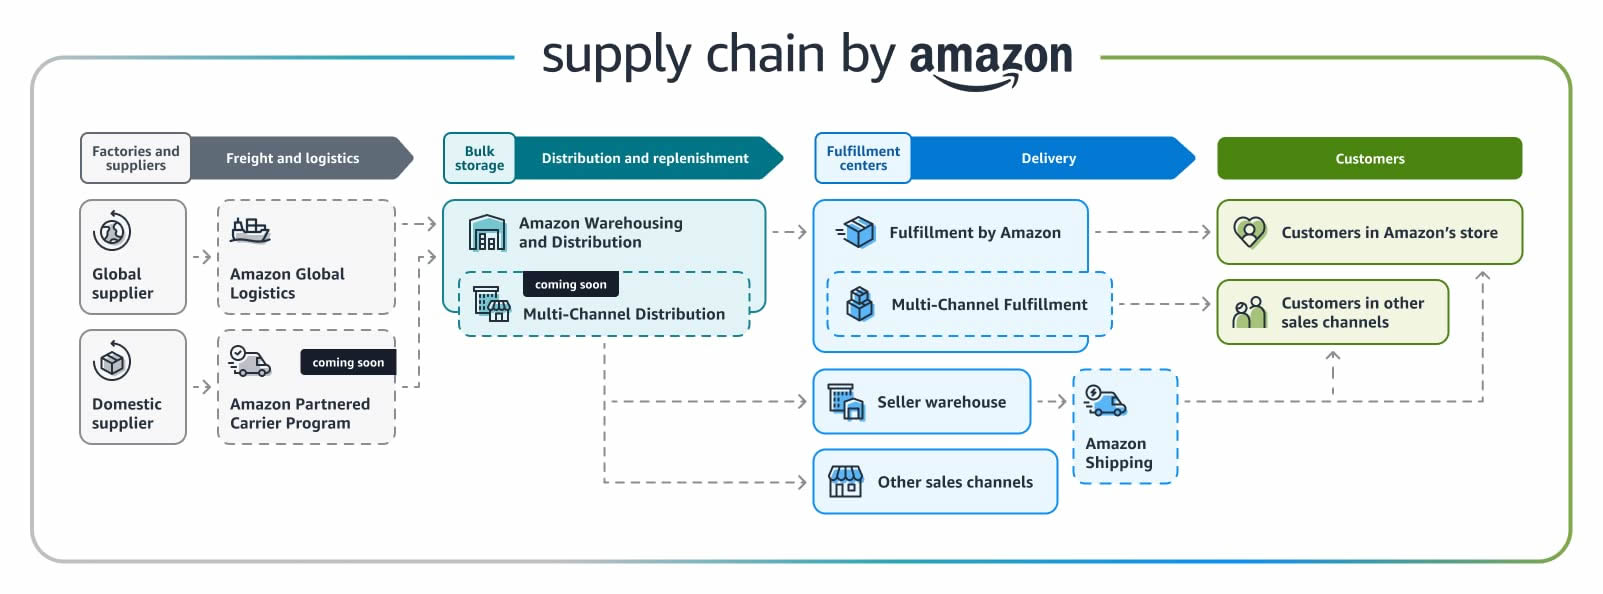 supply chain by amazon process